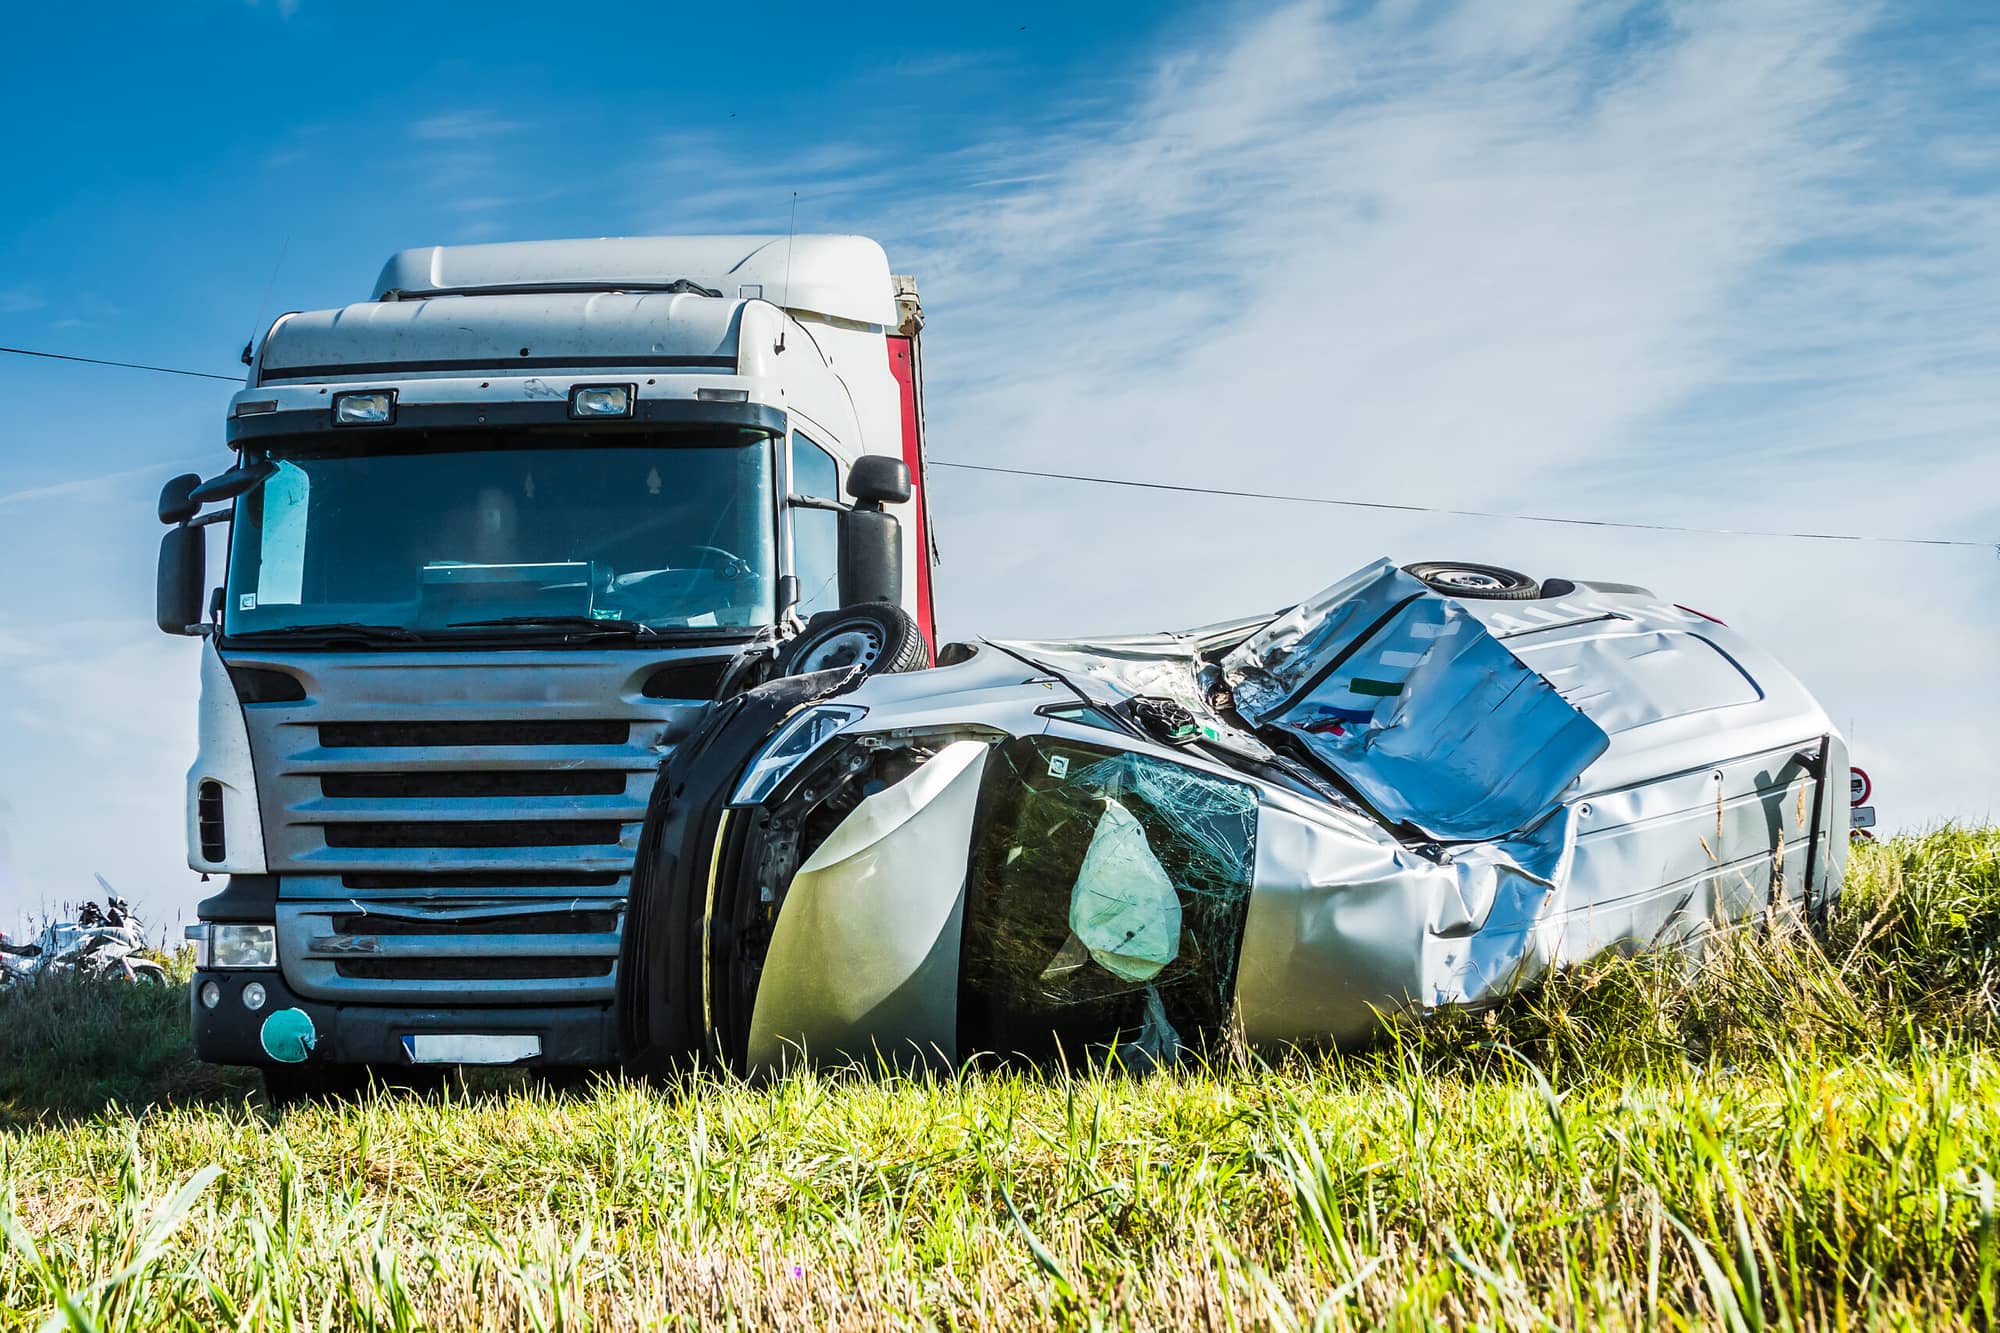 Car accident on a road in September, car after a collision with a heavy truck, transportation background. Compensation